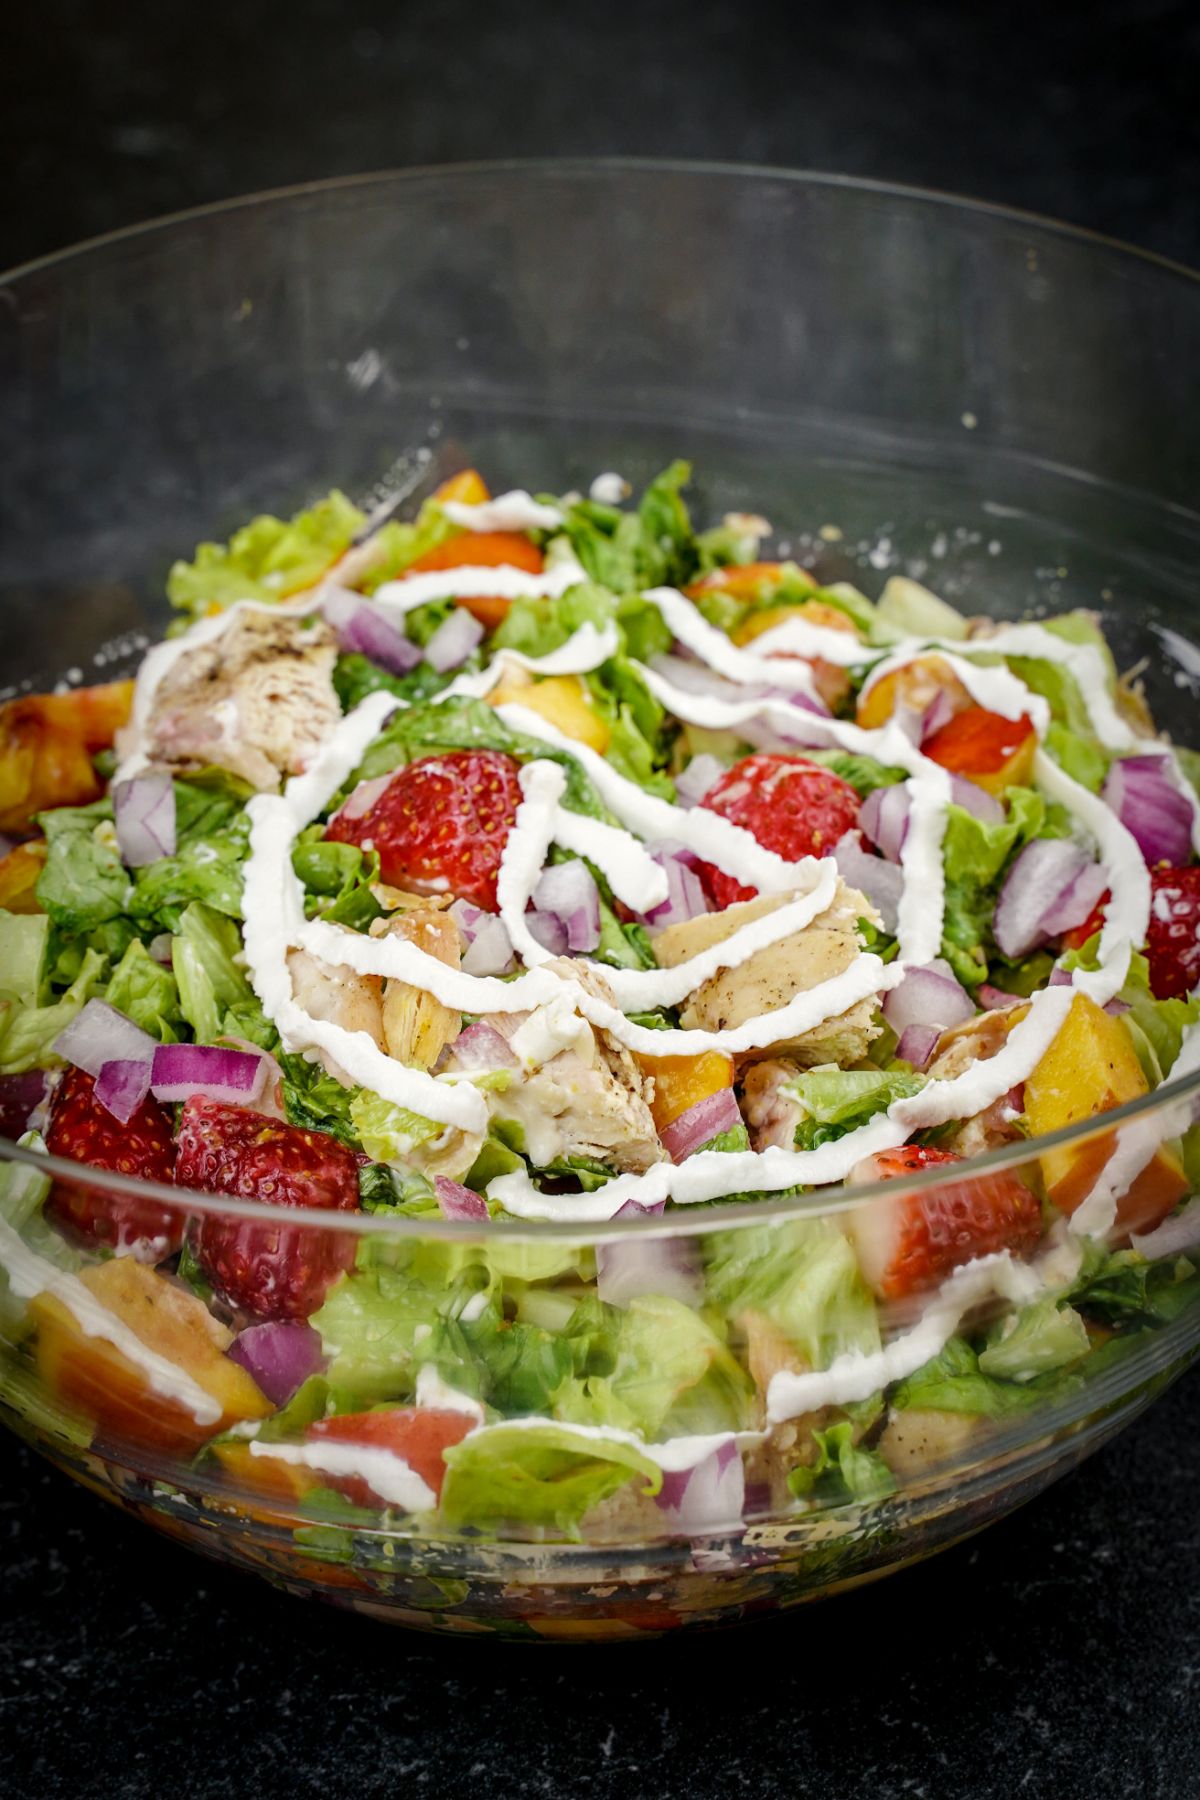 large glass bowl filled with salad chicken and fruit